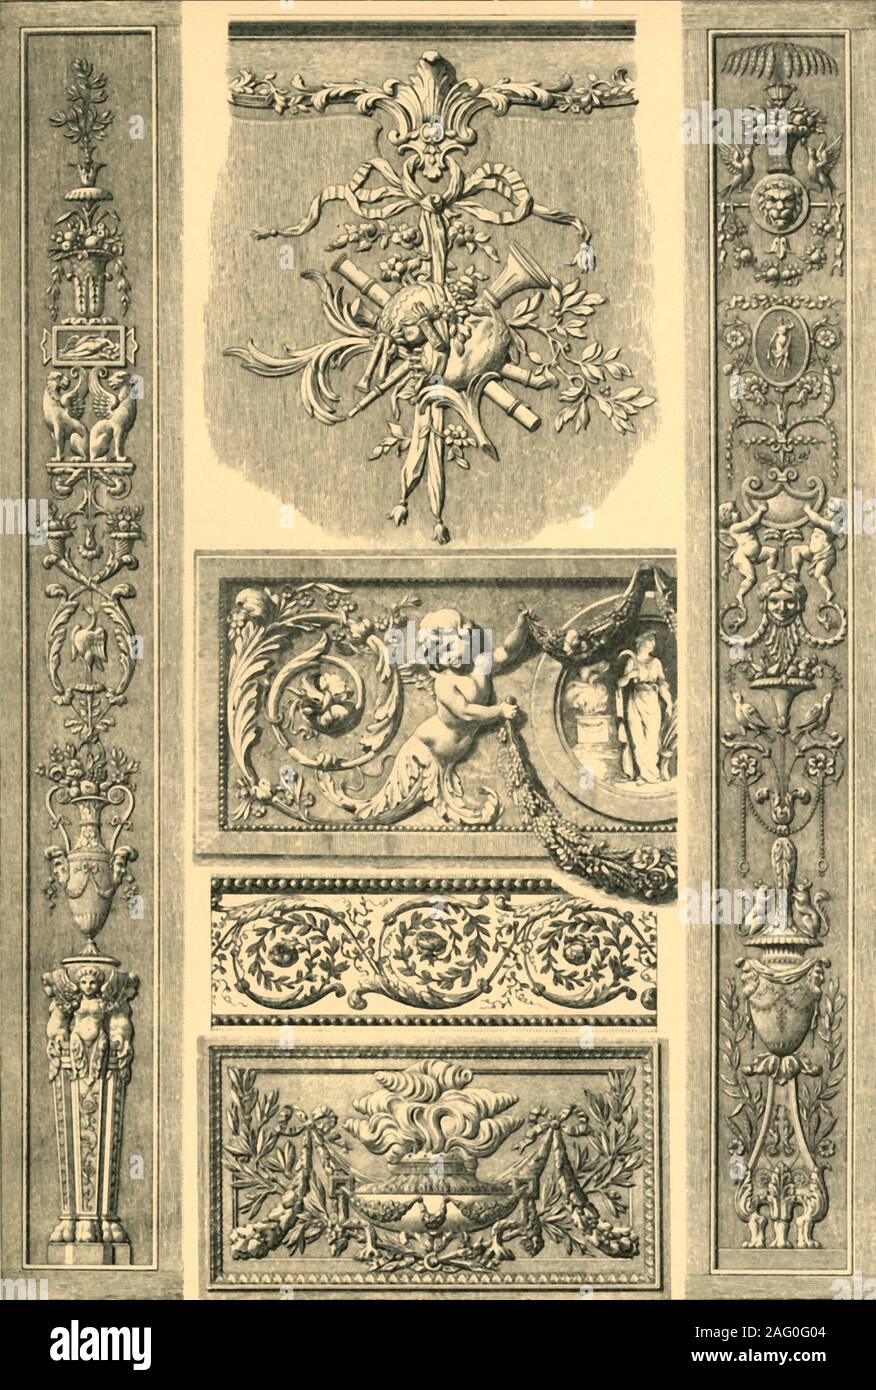 Painted plaster ornament, France, 18th century, (1898). 'Fig 1: Wood carving on a wainscot in the music room of the arsenal library at Paris, style of Louis XV [c1715-1774]. Figs 2 and 3: Carved pilaster from the wainscot of a saloon at Paris, style of Louis XVI [c1774-1792]. Fig 4: Painted frieze from the boudoir of Queen Marie Antoinette in the Castle at Fontainebleau, style of Louis XVI. Fig 5: Panel of a stucco cavetto at a ceiling of a saloon at Paris, style of Louis XVI. Fig 6. Carved wall panel above a saloon door in the H&#xf4;tel de Ville at Bordeaux, style of Louis XVI...&quot;Zopfst Stock Photo